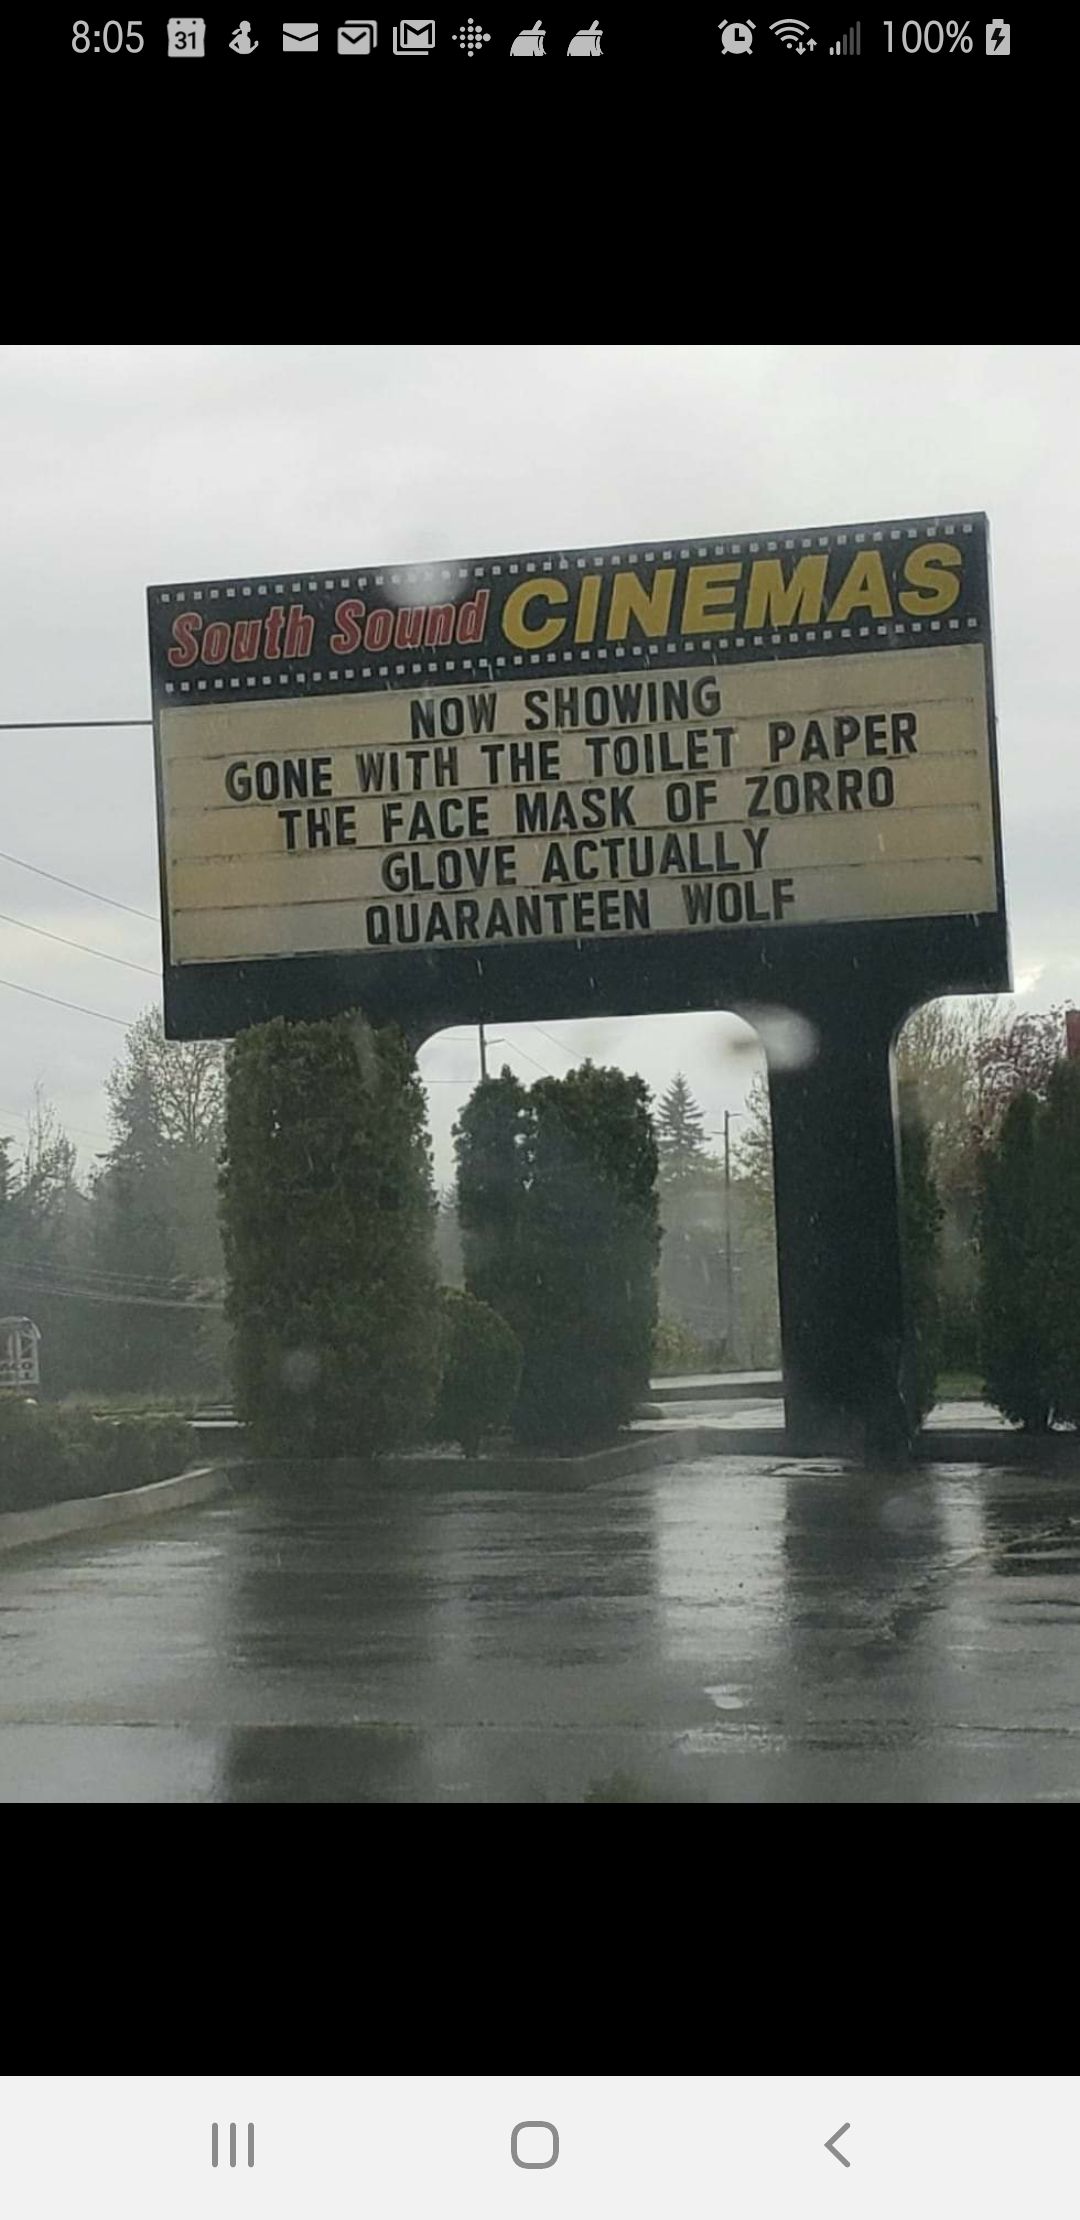 Our local theater has a sense of humor. :-)